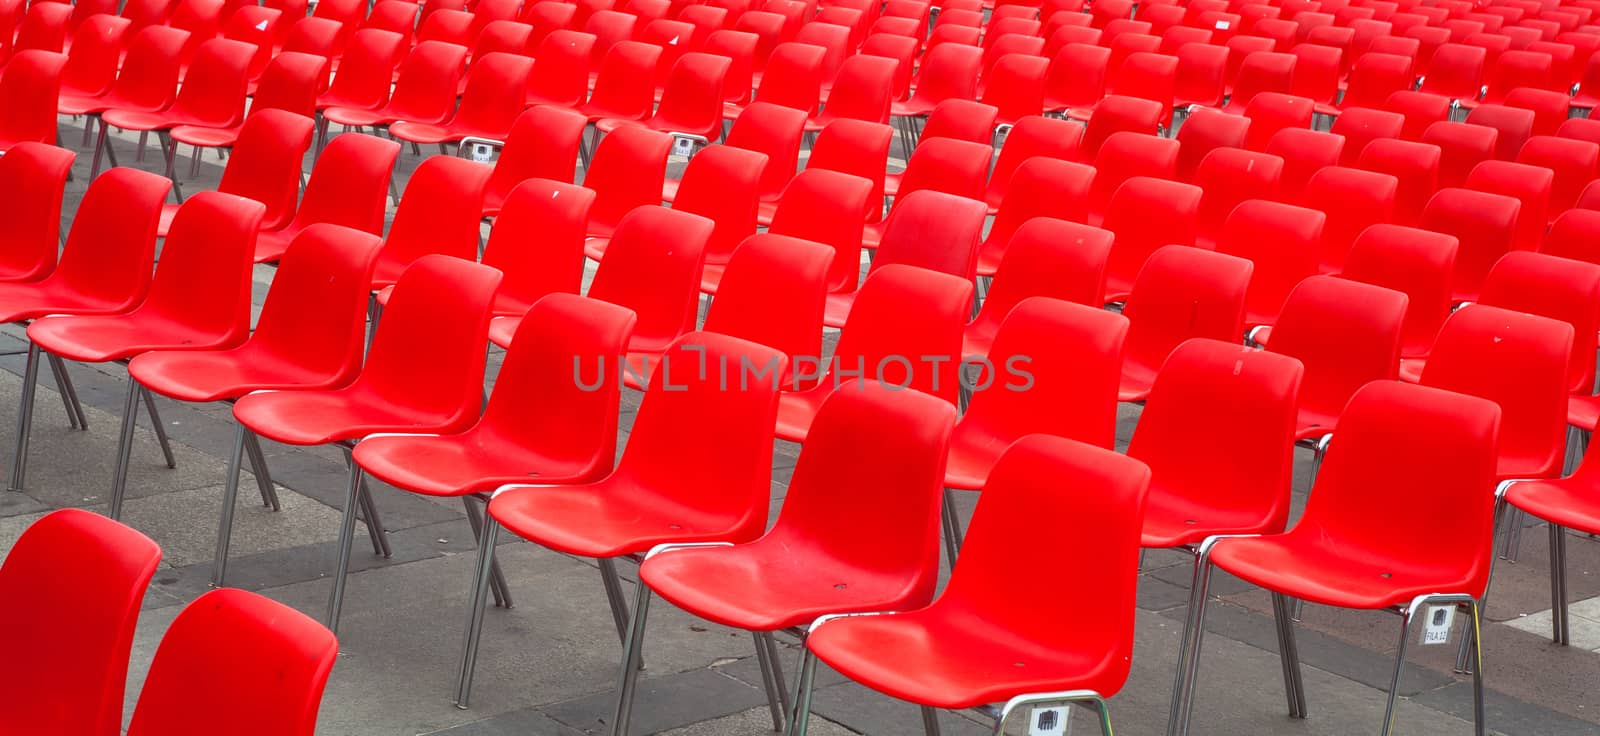 View of many red chairs ready for conference